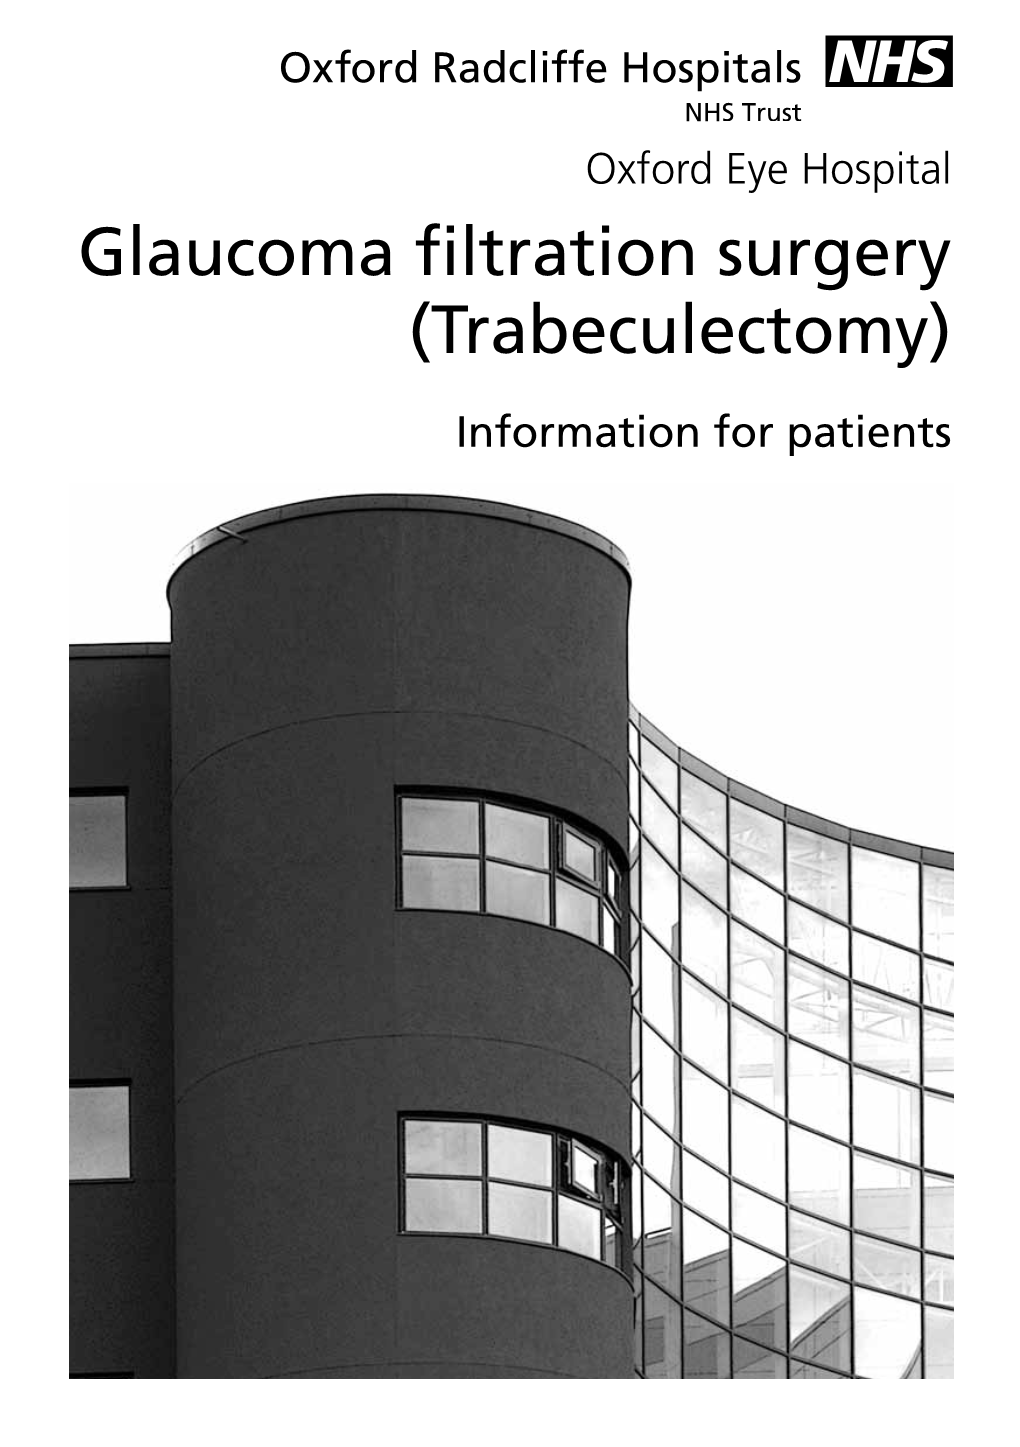 Glaucoma Filtration Surgery (Trabeculectomy)